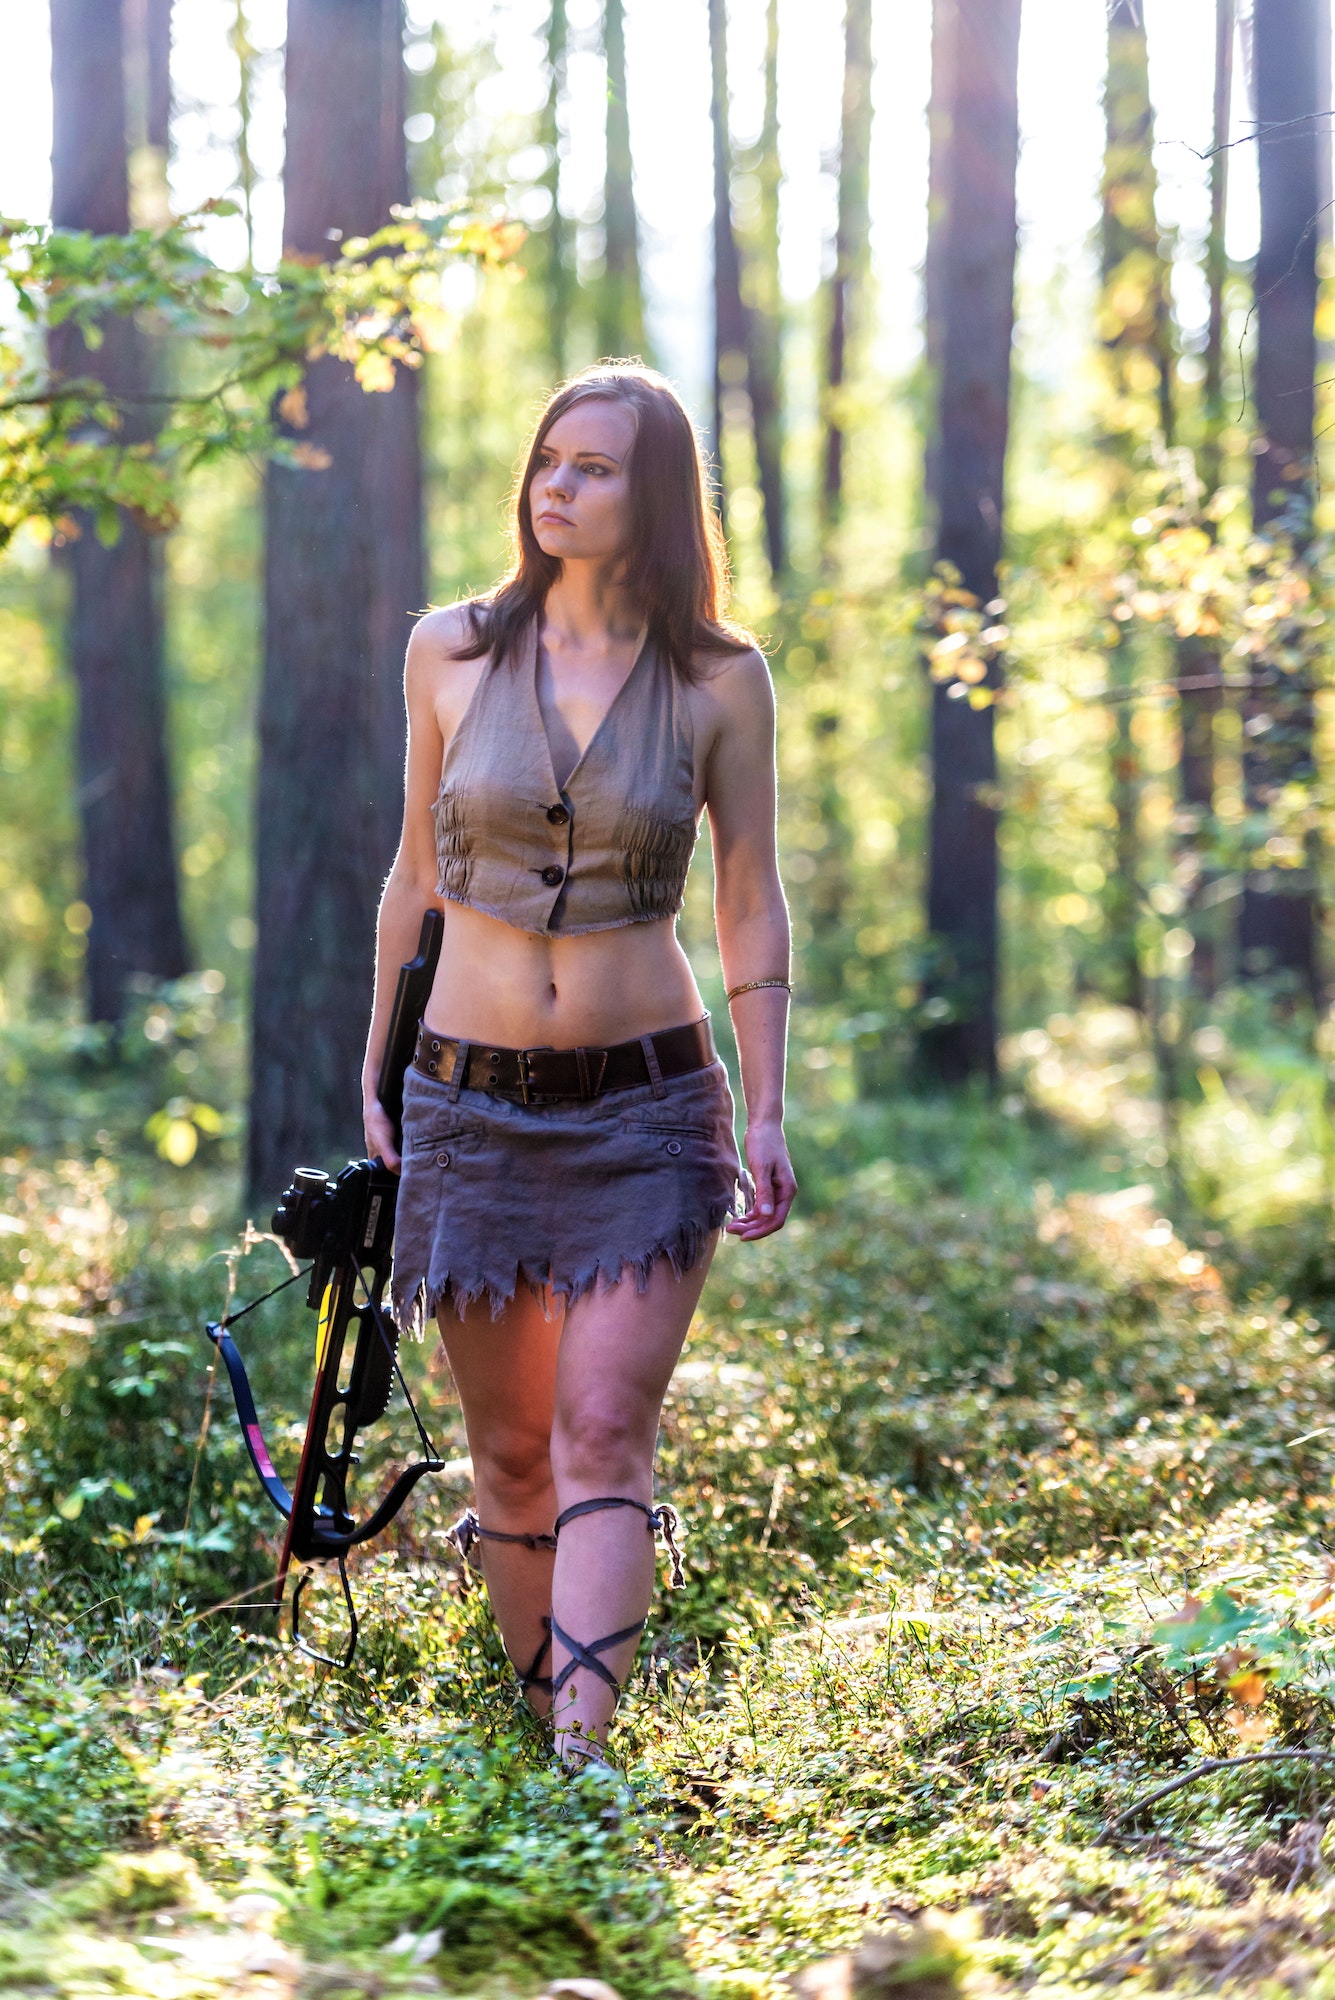 A girl with a arbalet goes hunting in the woods.